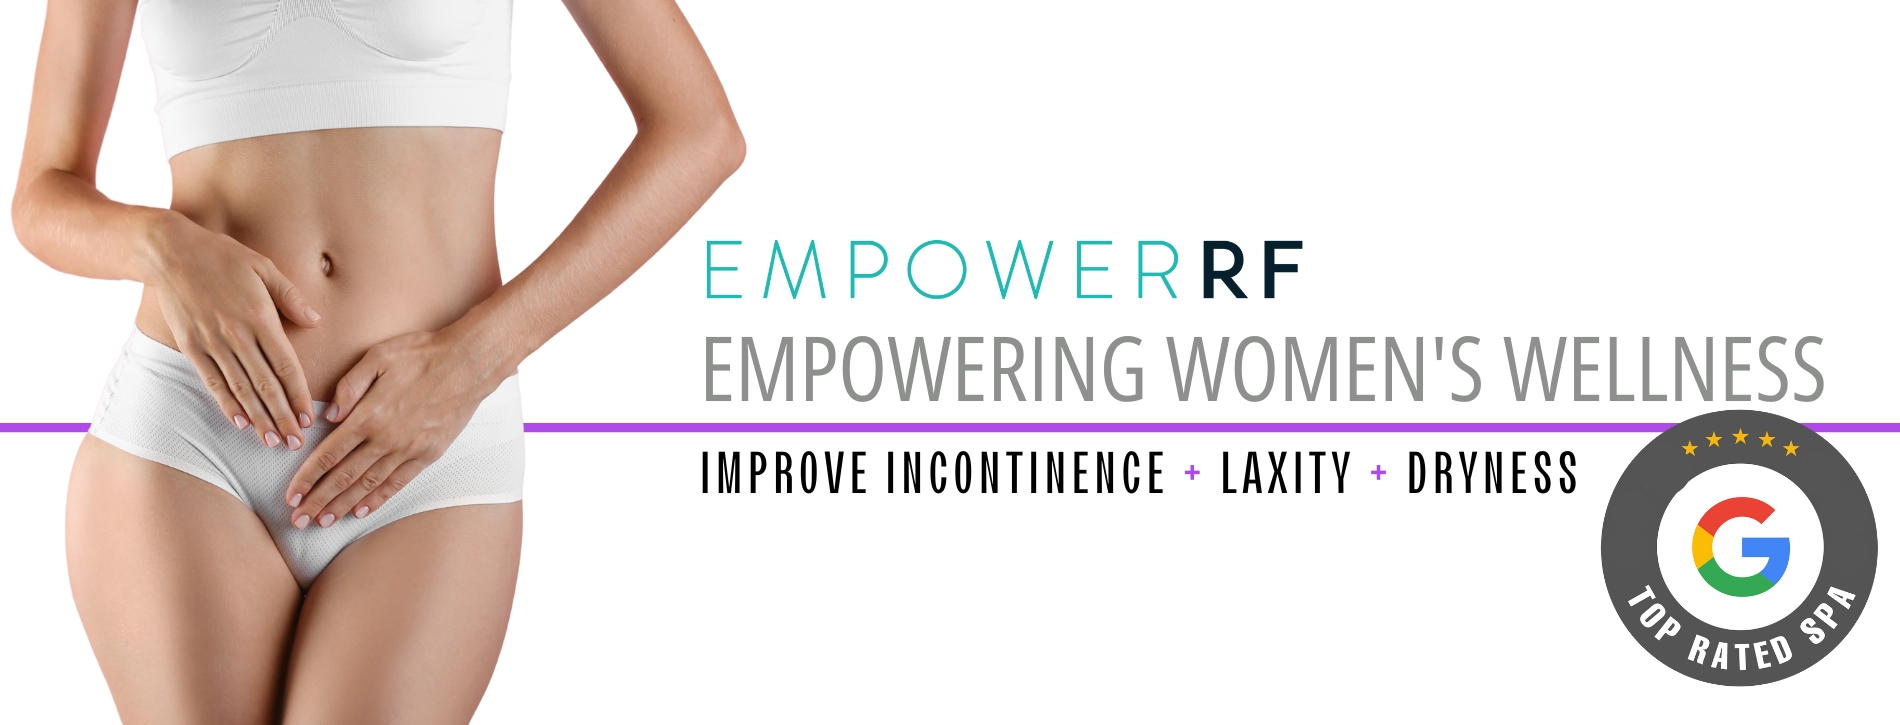 A healthy woman in white underwear promoting EMPOWER RF Women’s Wellness Treatments